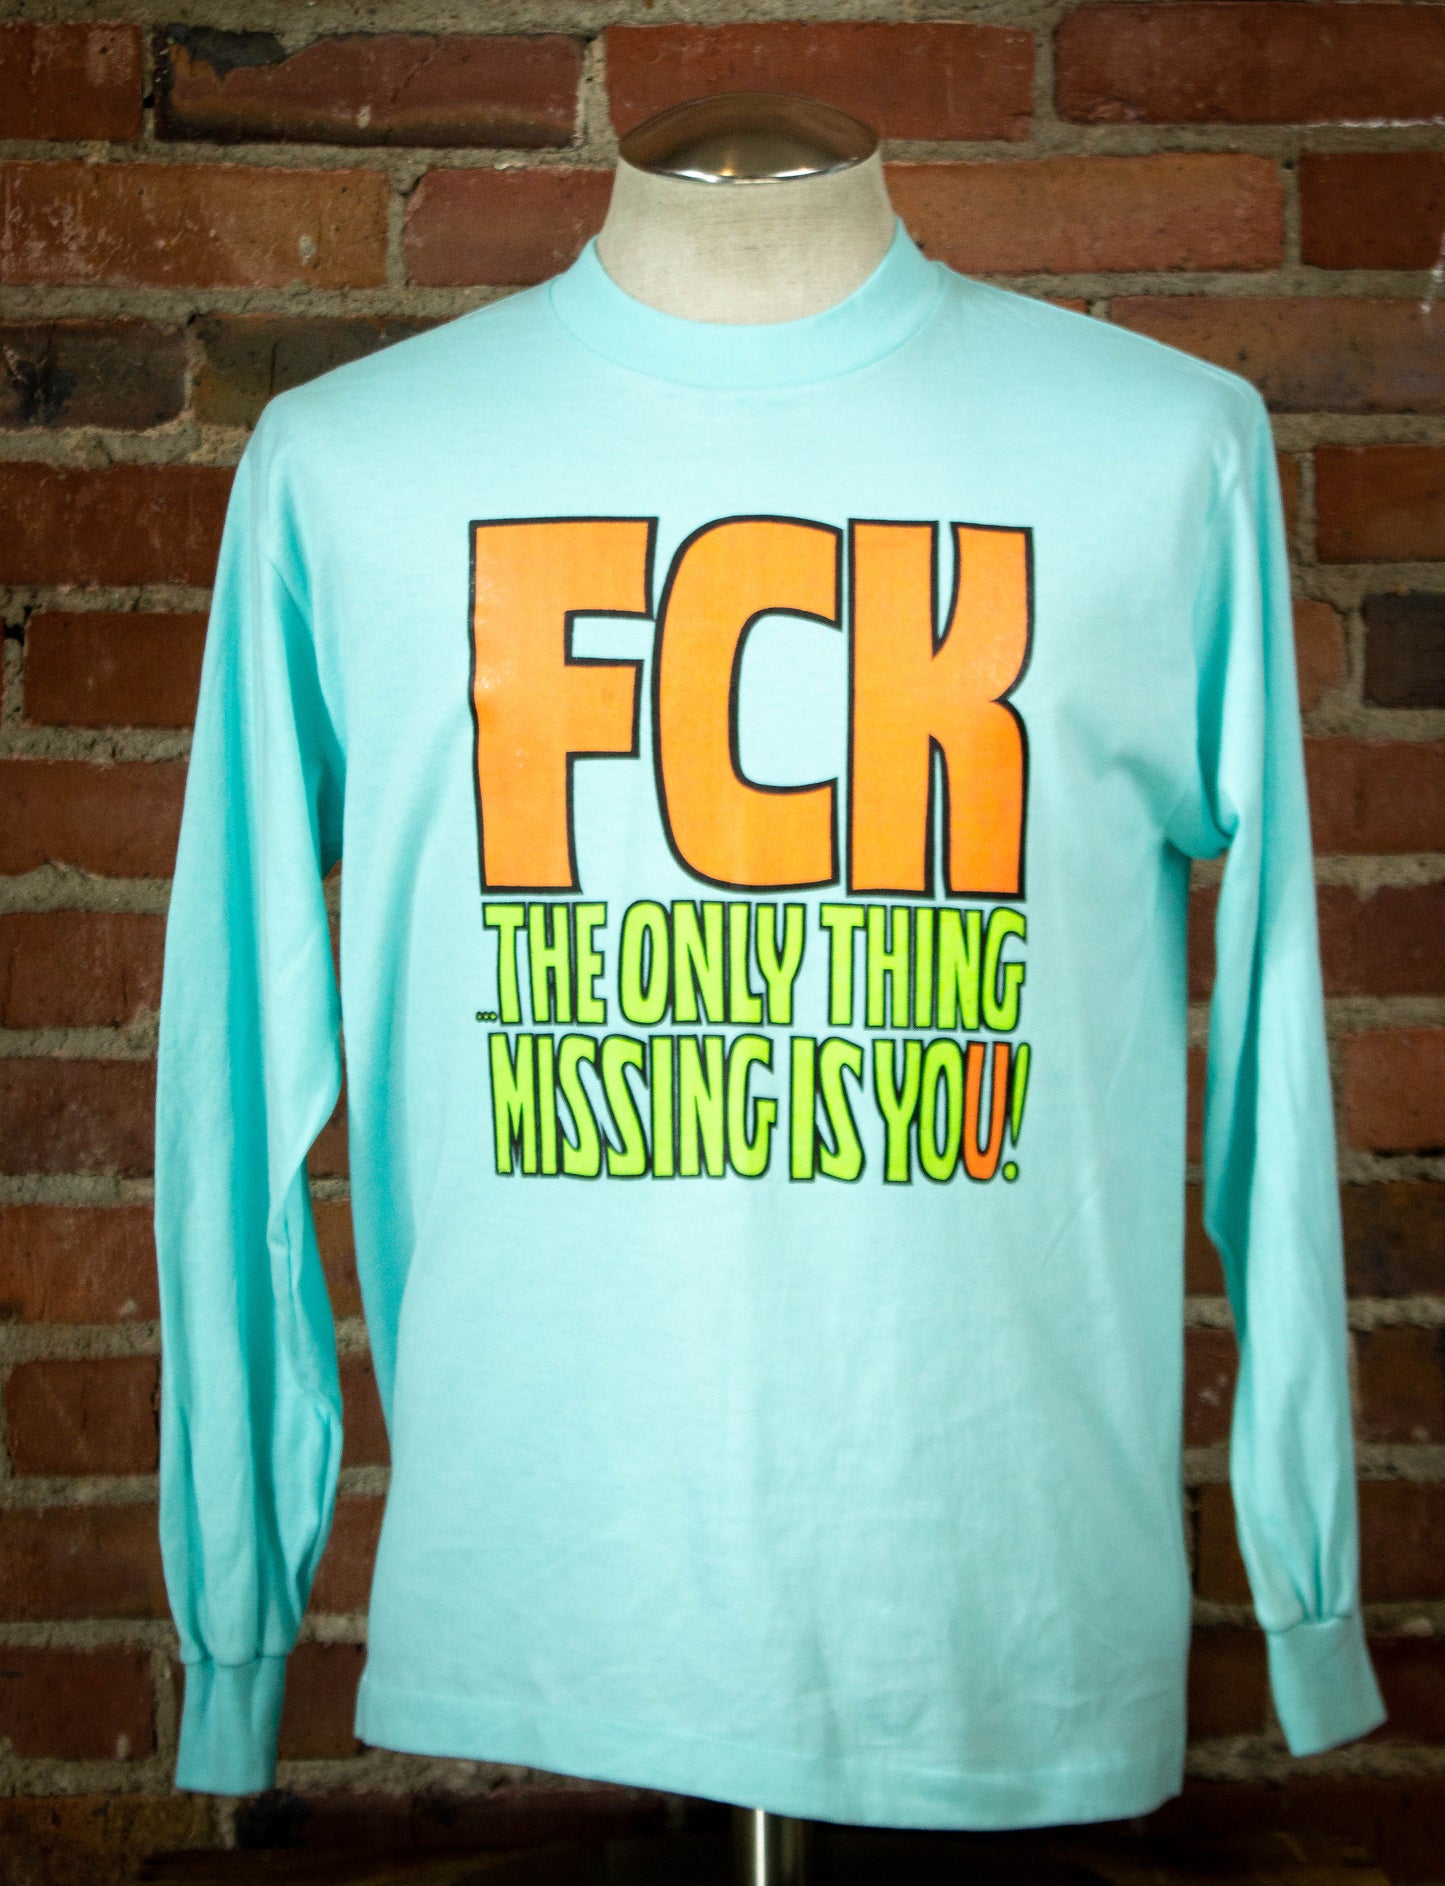 Vintage Deadstock FCK "The Only Thing Missing Is U" Seafoam Green Long Sleeve Graphic T Shirt Unisex Large